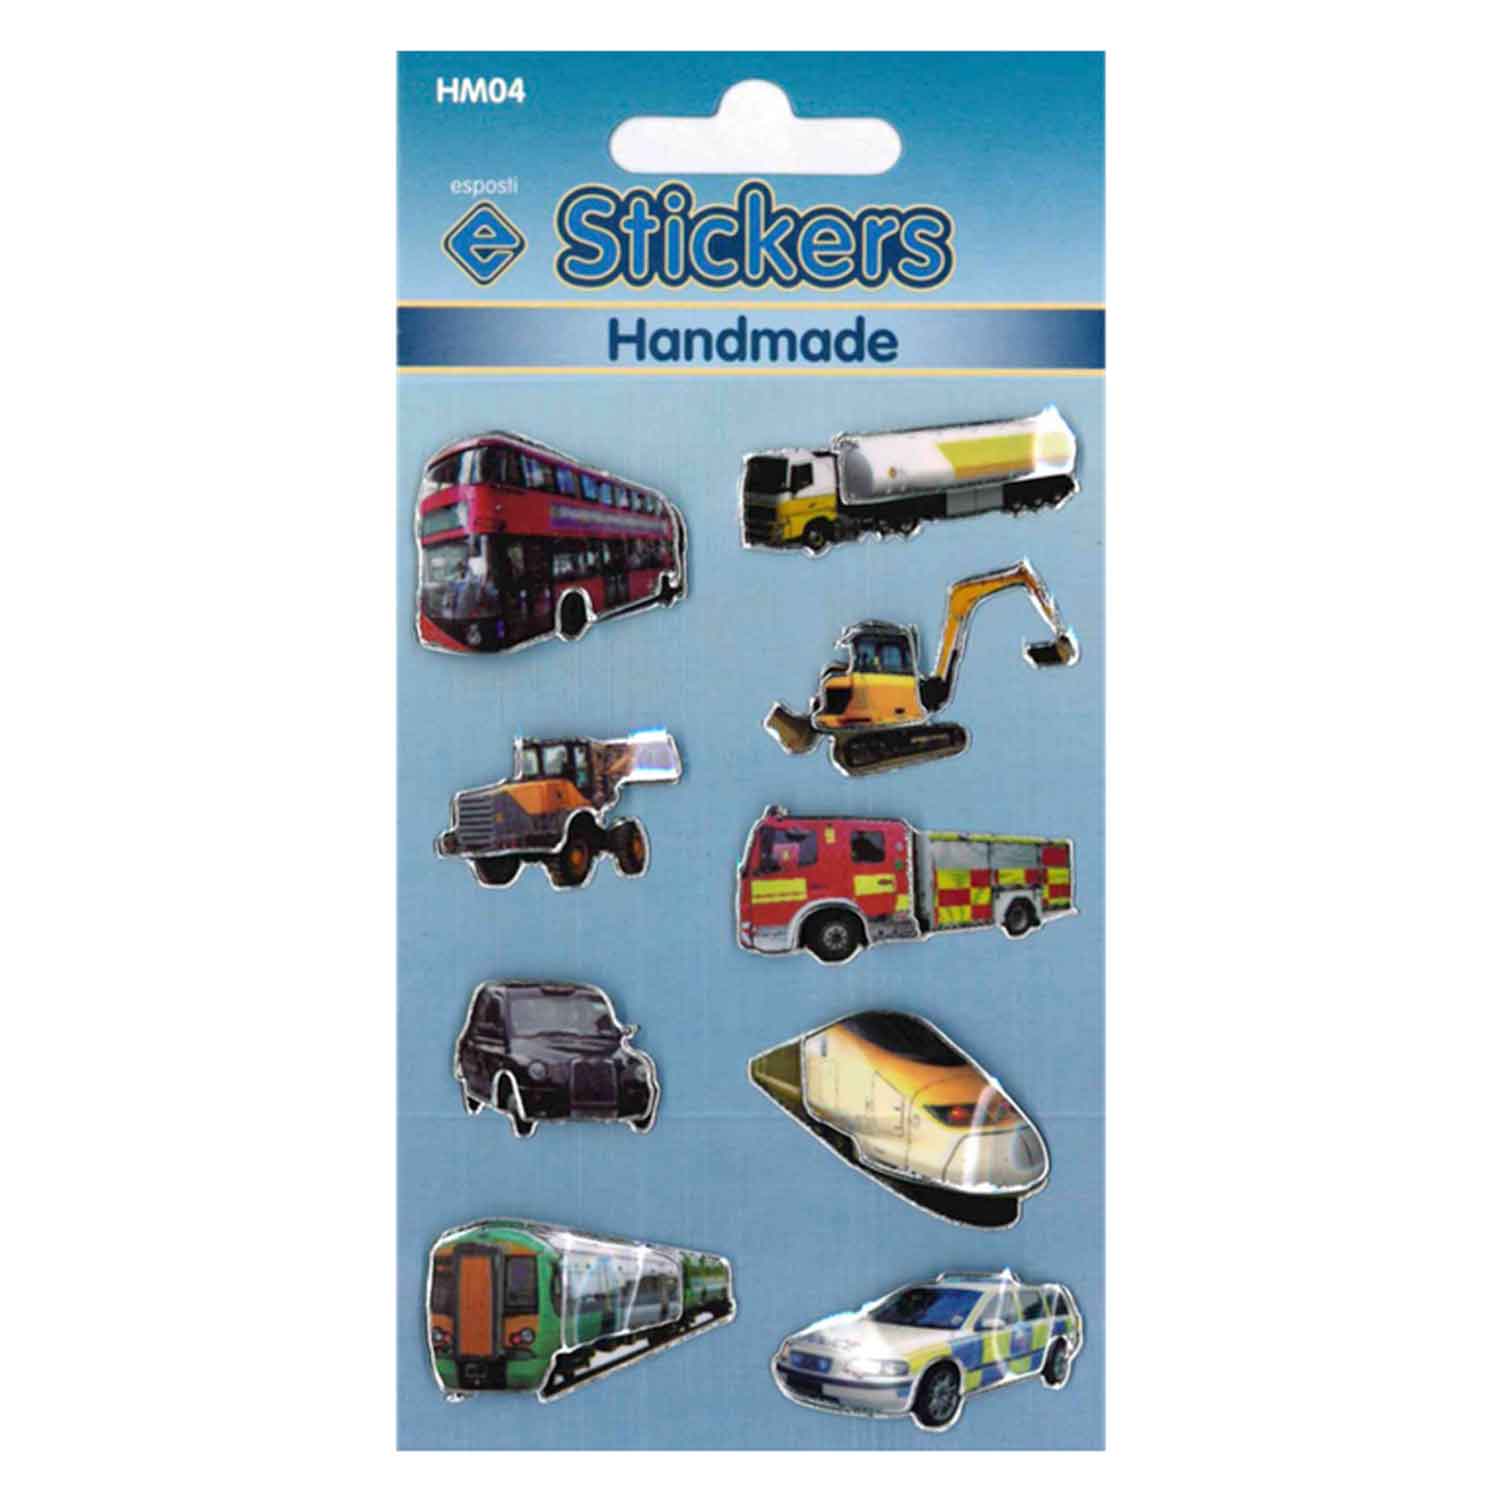 Transport Self Adhesive Handmade Novelty Stickers - Pack of 10